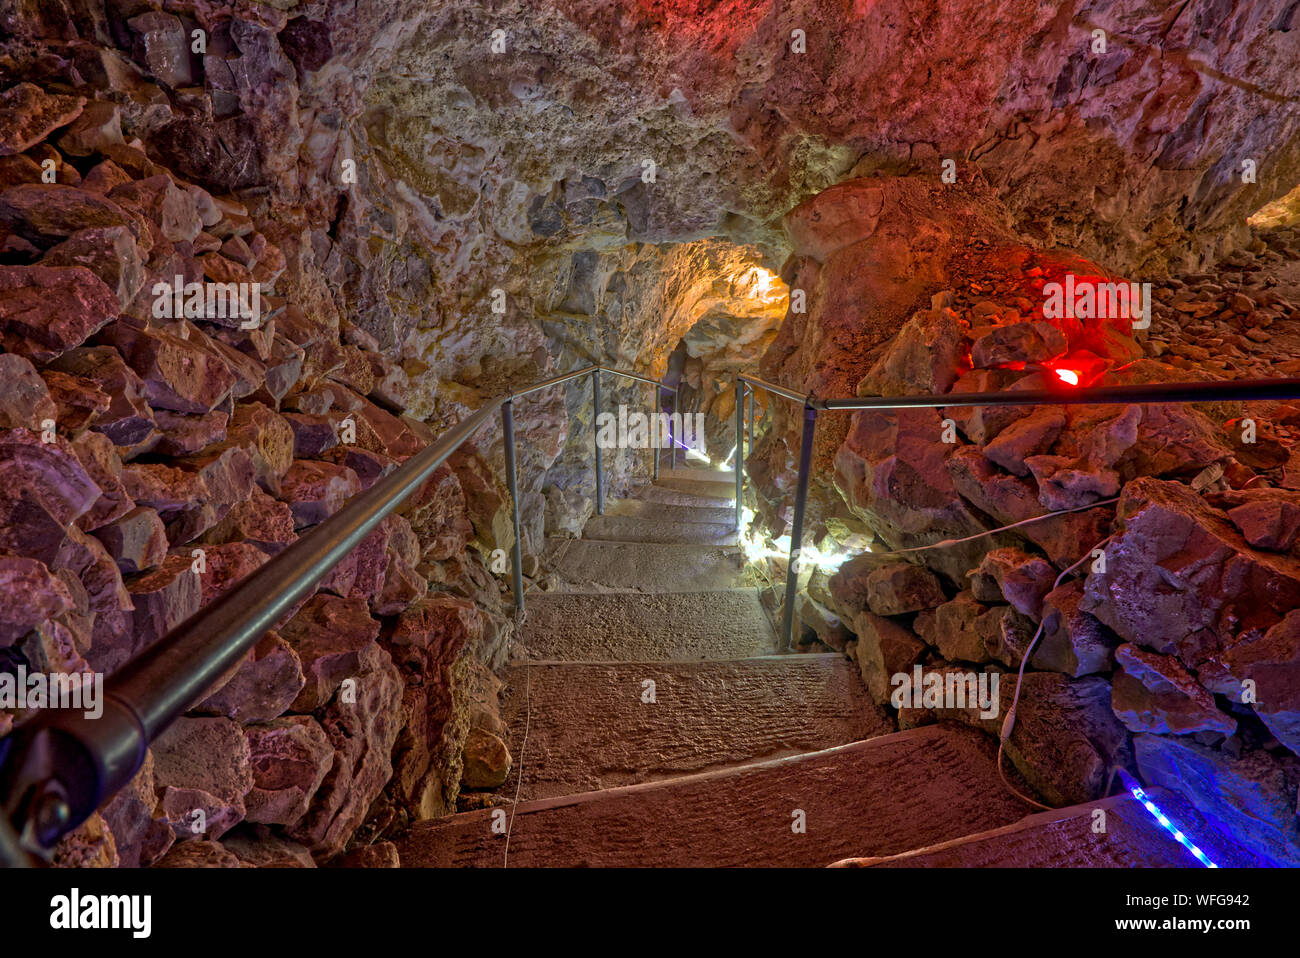 Stairway down into the Grand Canyon Caverns, Peach Springs, Mile Marker 115, Arizona, United States Stock Photo